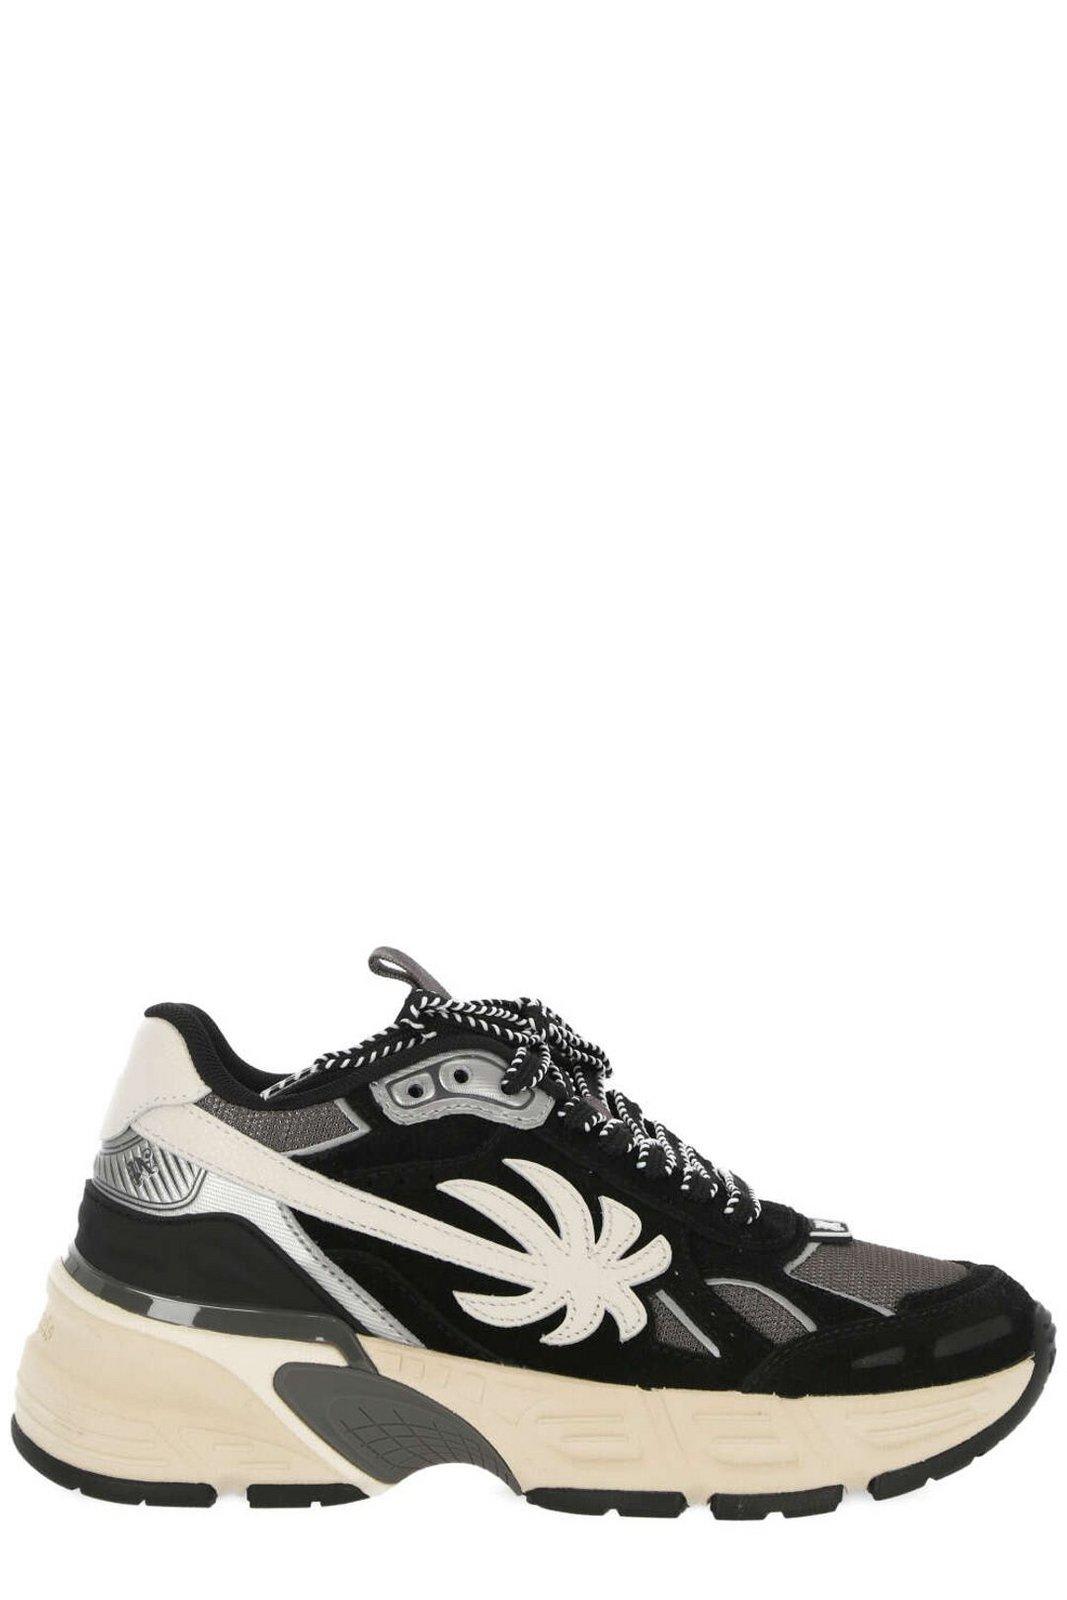 Shop Palm Angels Palm Patch Sneakers In Black Grey